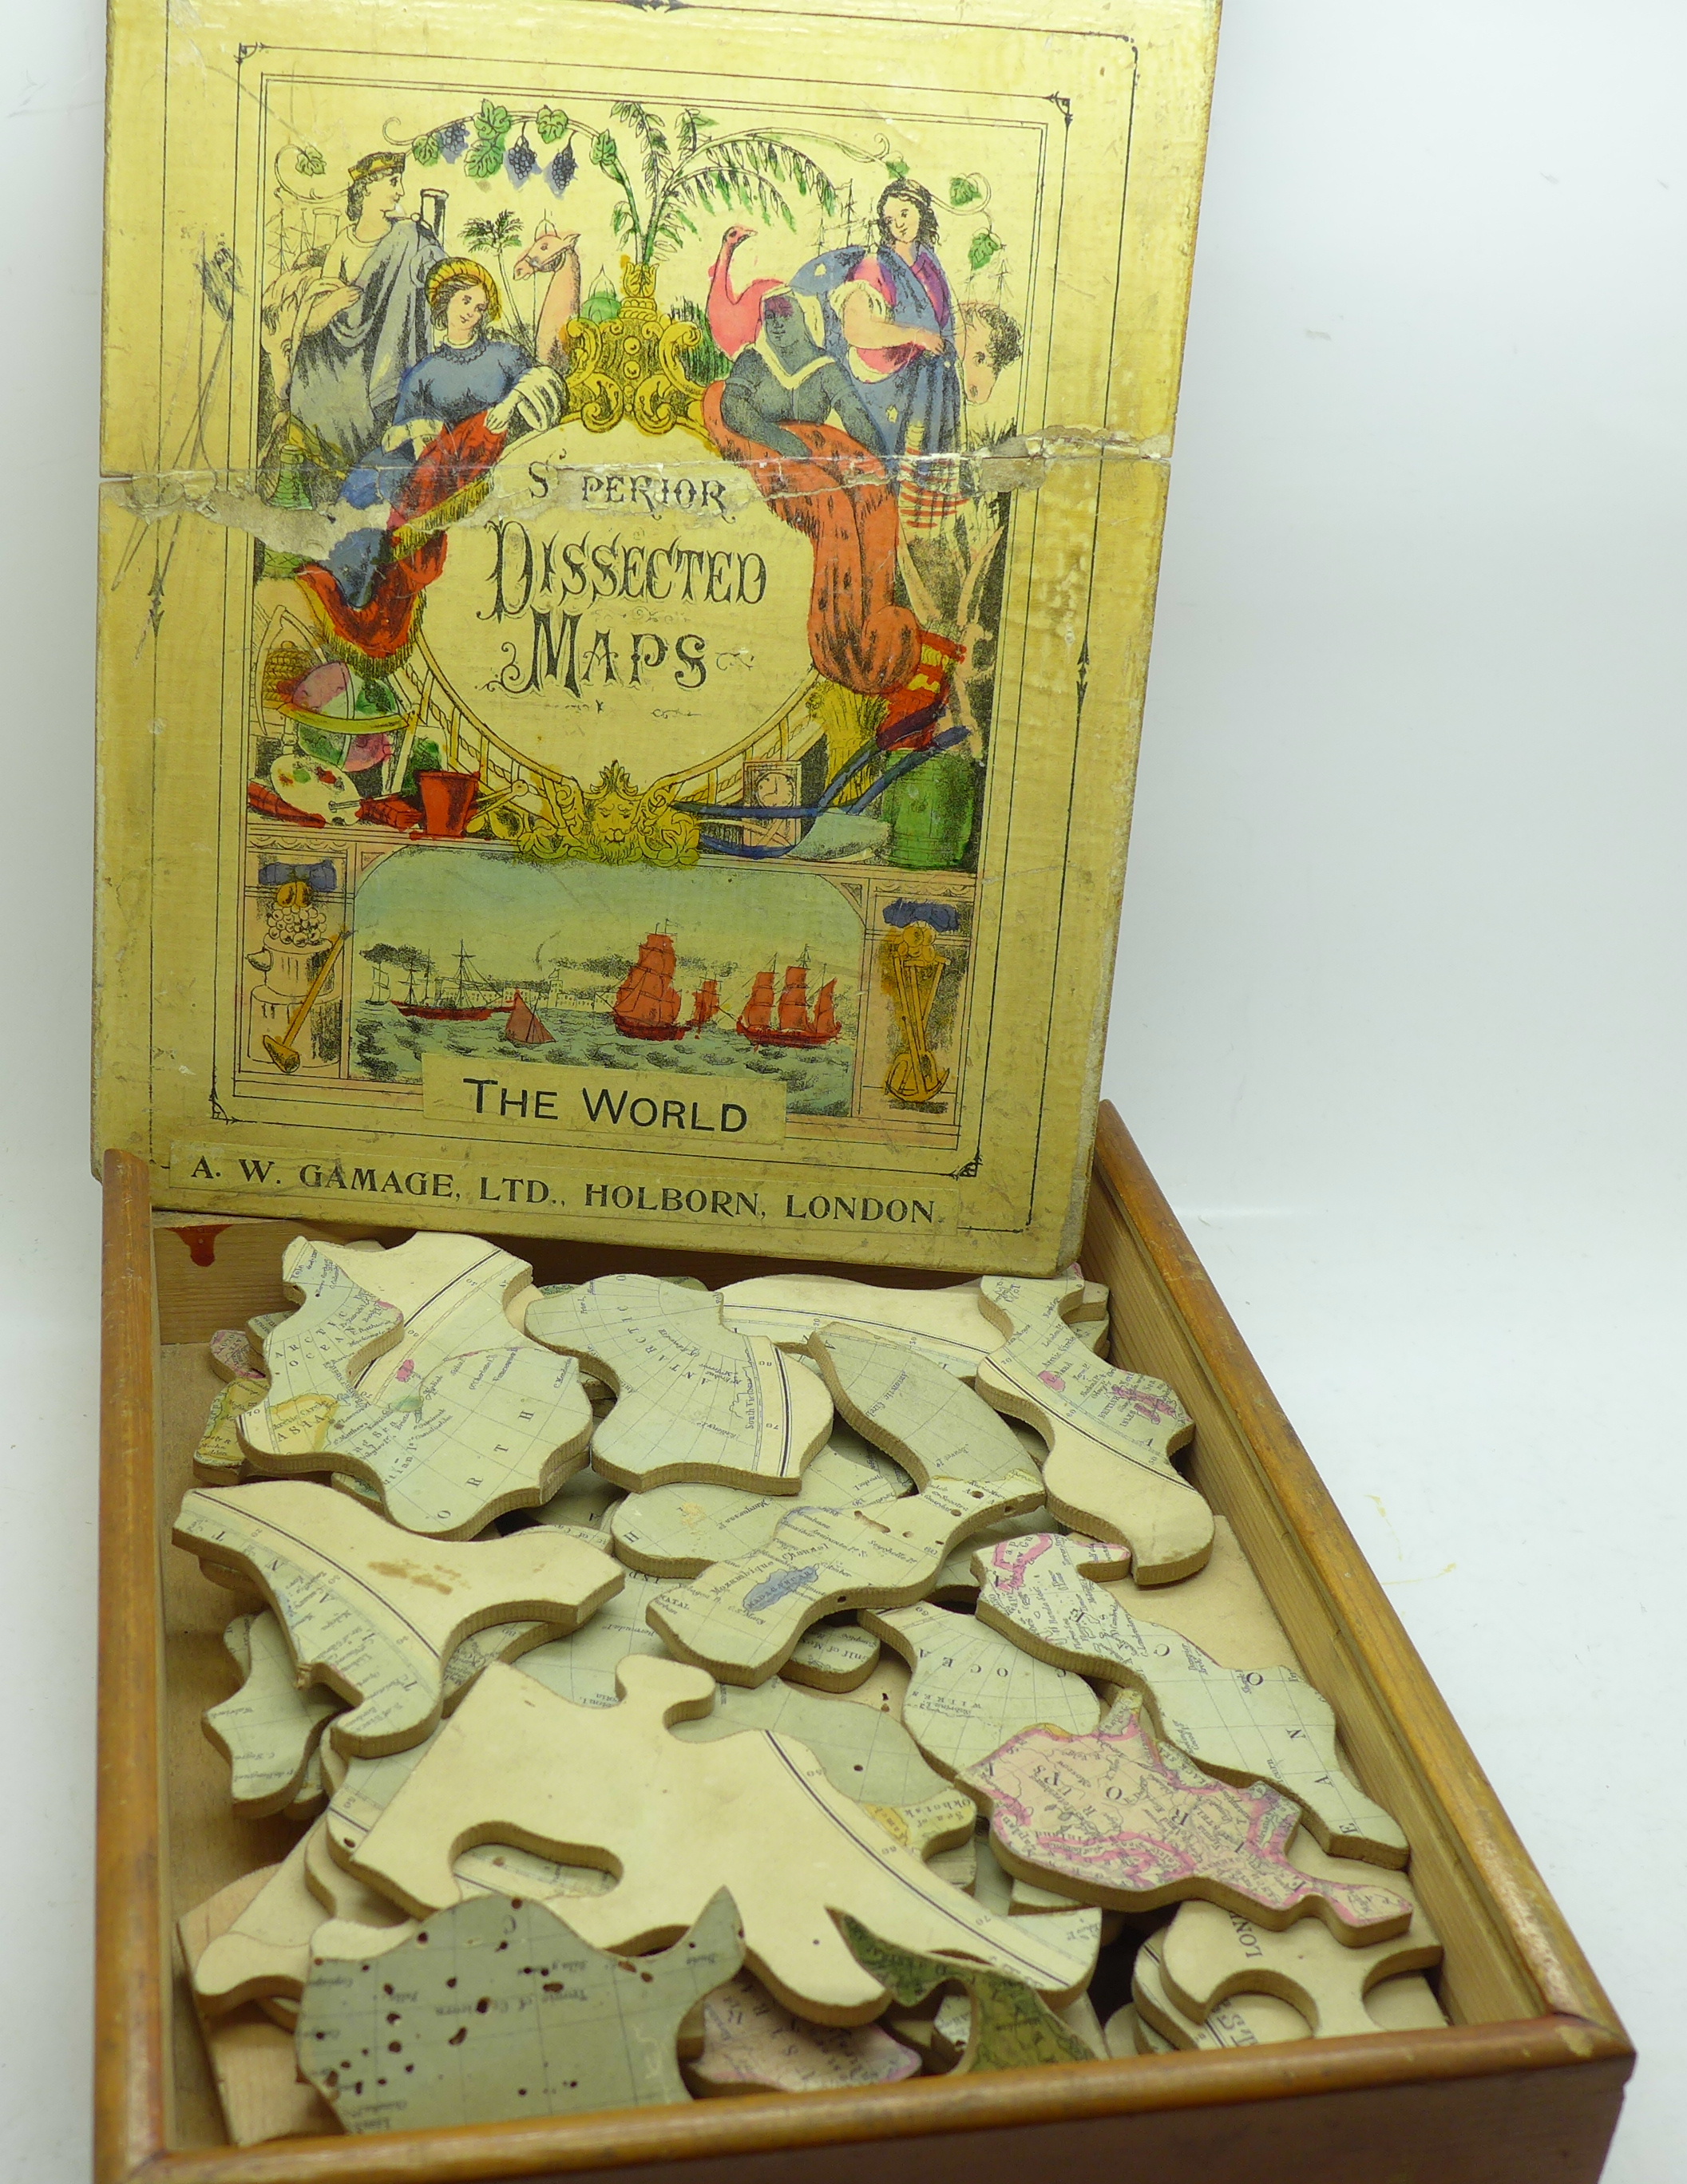 An A.W. Gamage Ltd. Superior Dissected Maps puzzle, boxed (signs of woodworm)